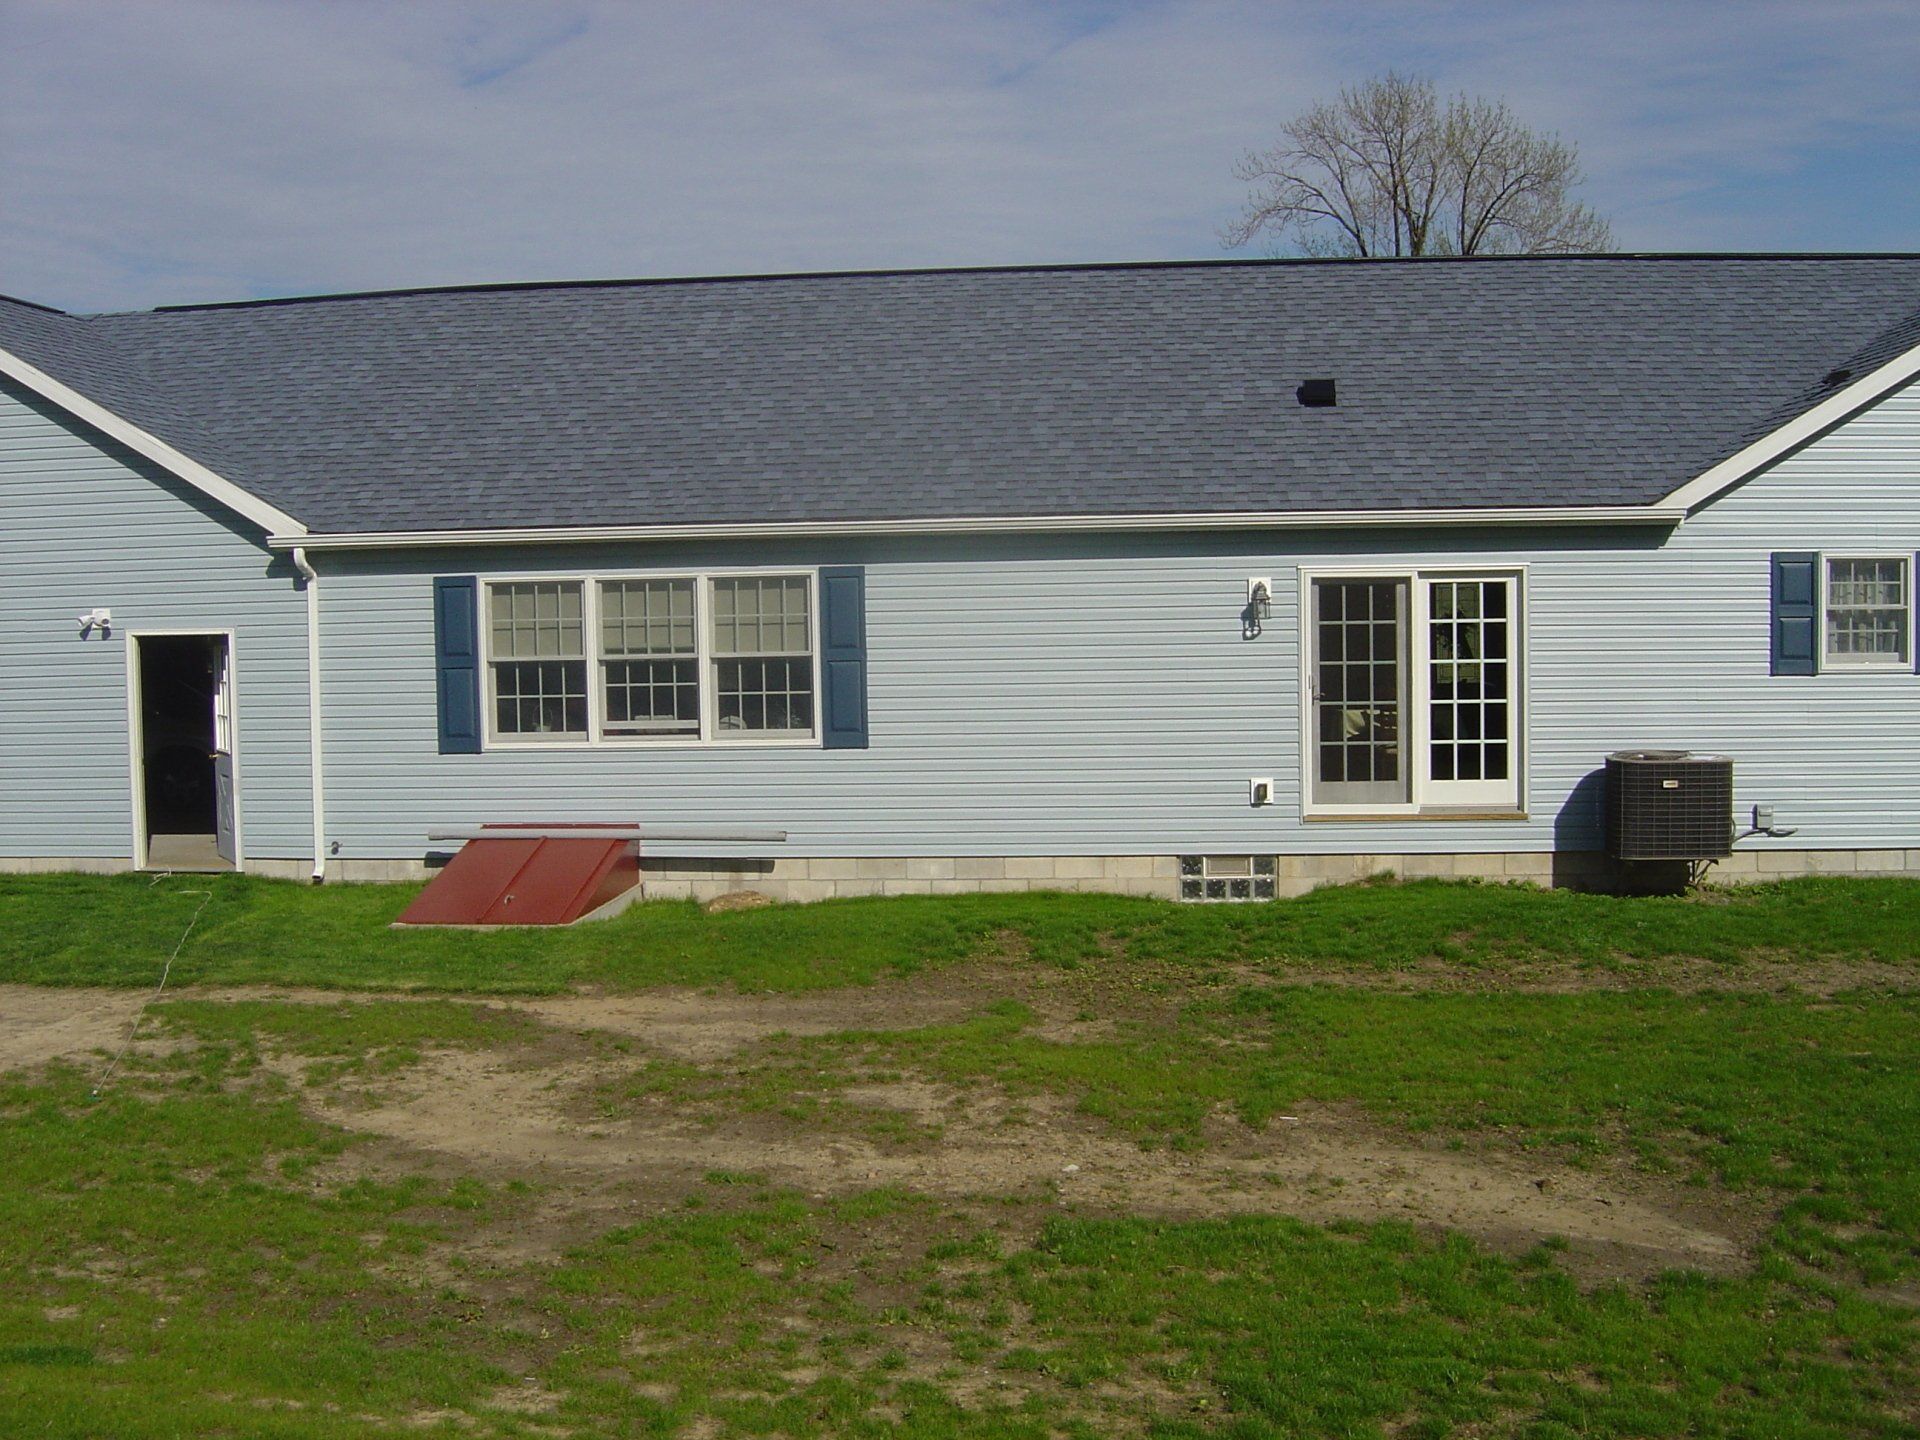 A blue house with a gray roof and blue shutters